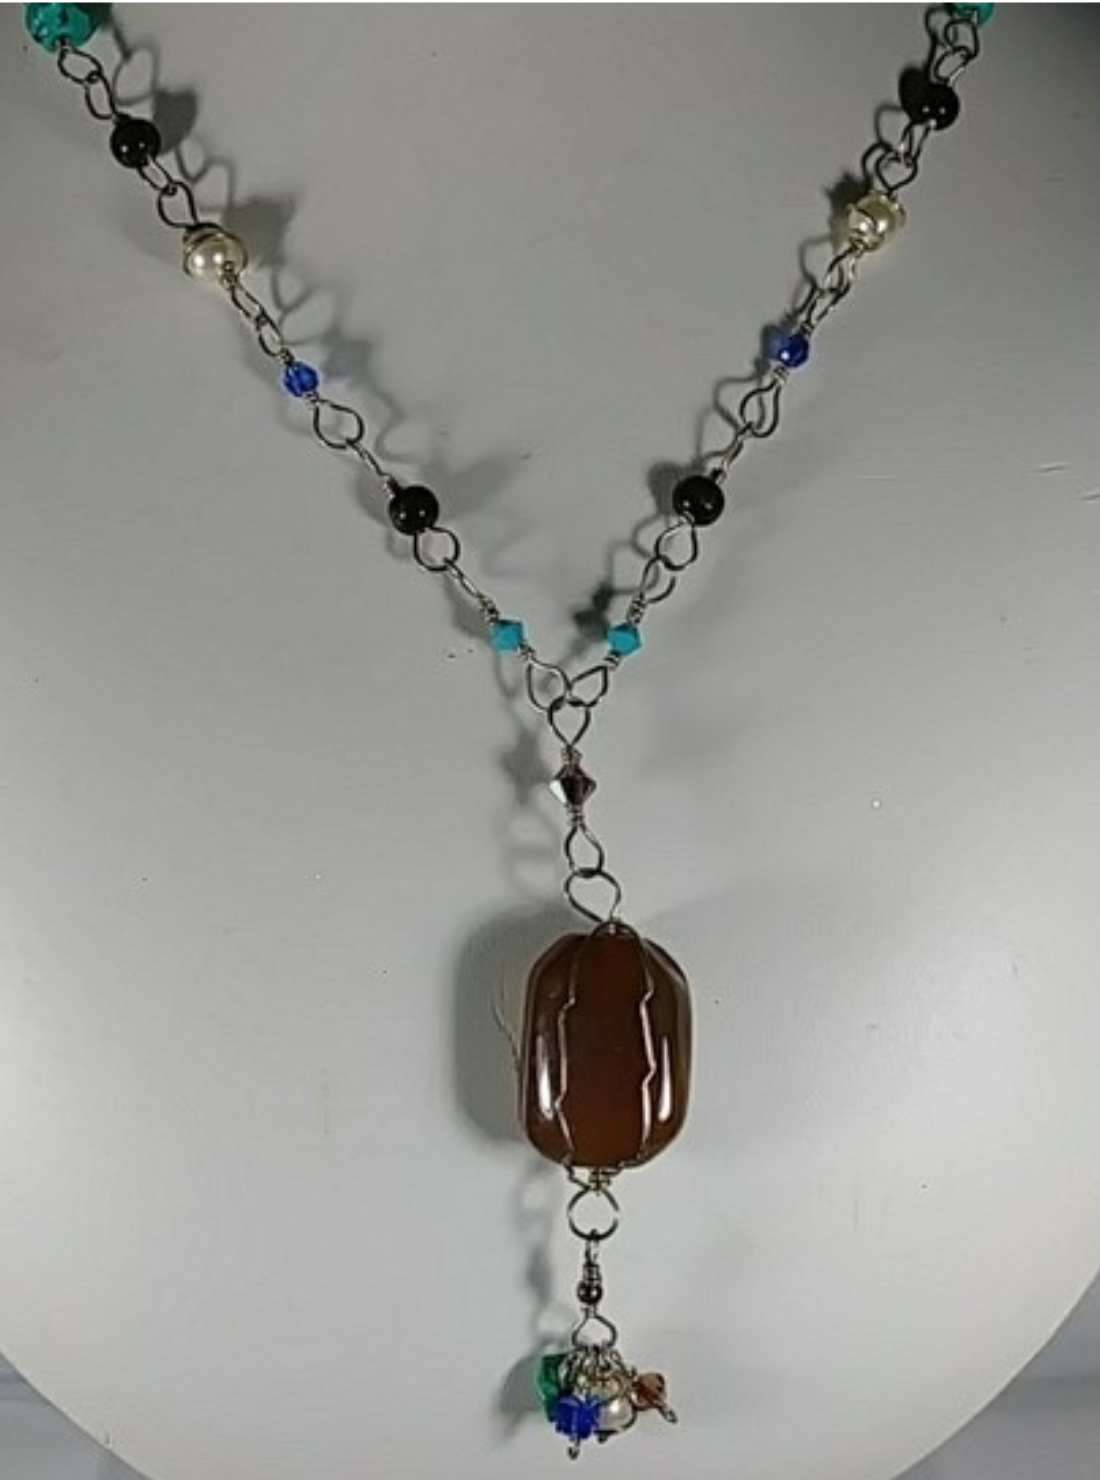 (302 -NCK) - Description: Sterling Silver Necklace, Handcrafted Chain, Turquoise & Tigers Eye Gemstones, Swarovski Crystal and Swarovski Crystal Pearl Beads, Wood Mask Beads - Large Carnelian Gemstone Focal Bead. Dimension: 24' L (Inches